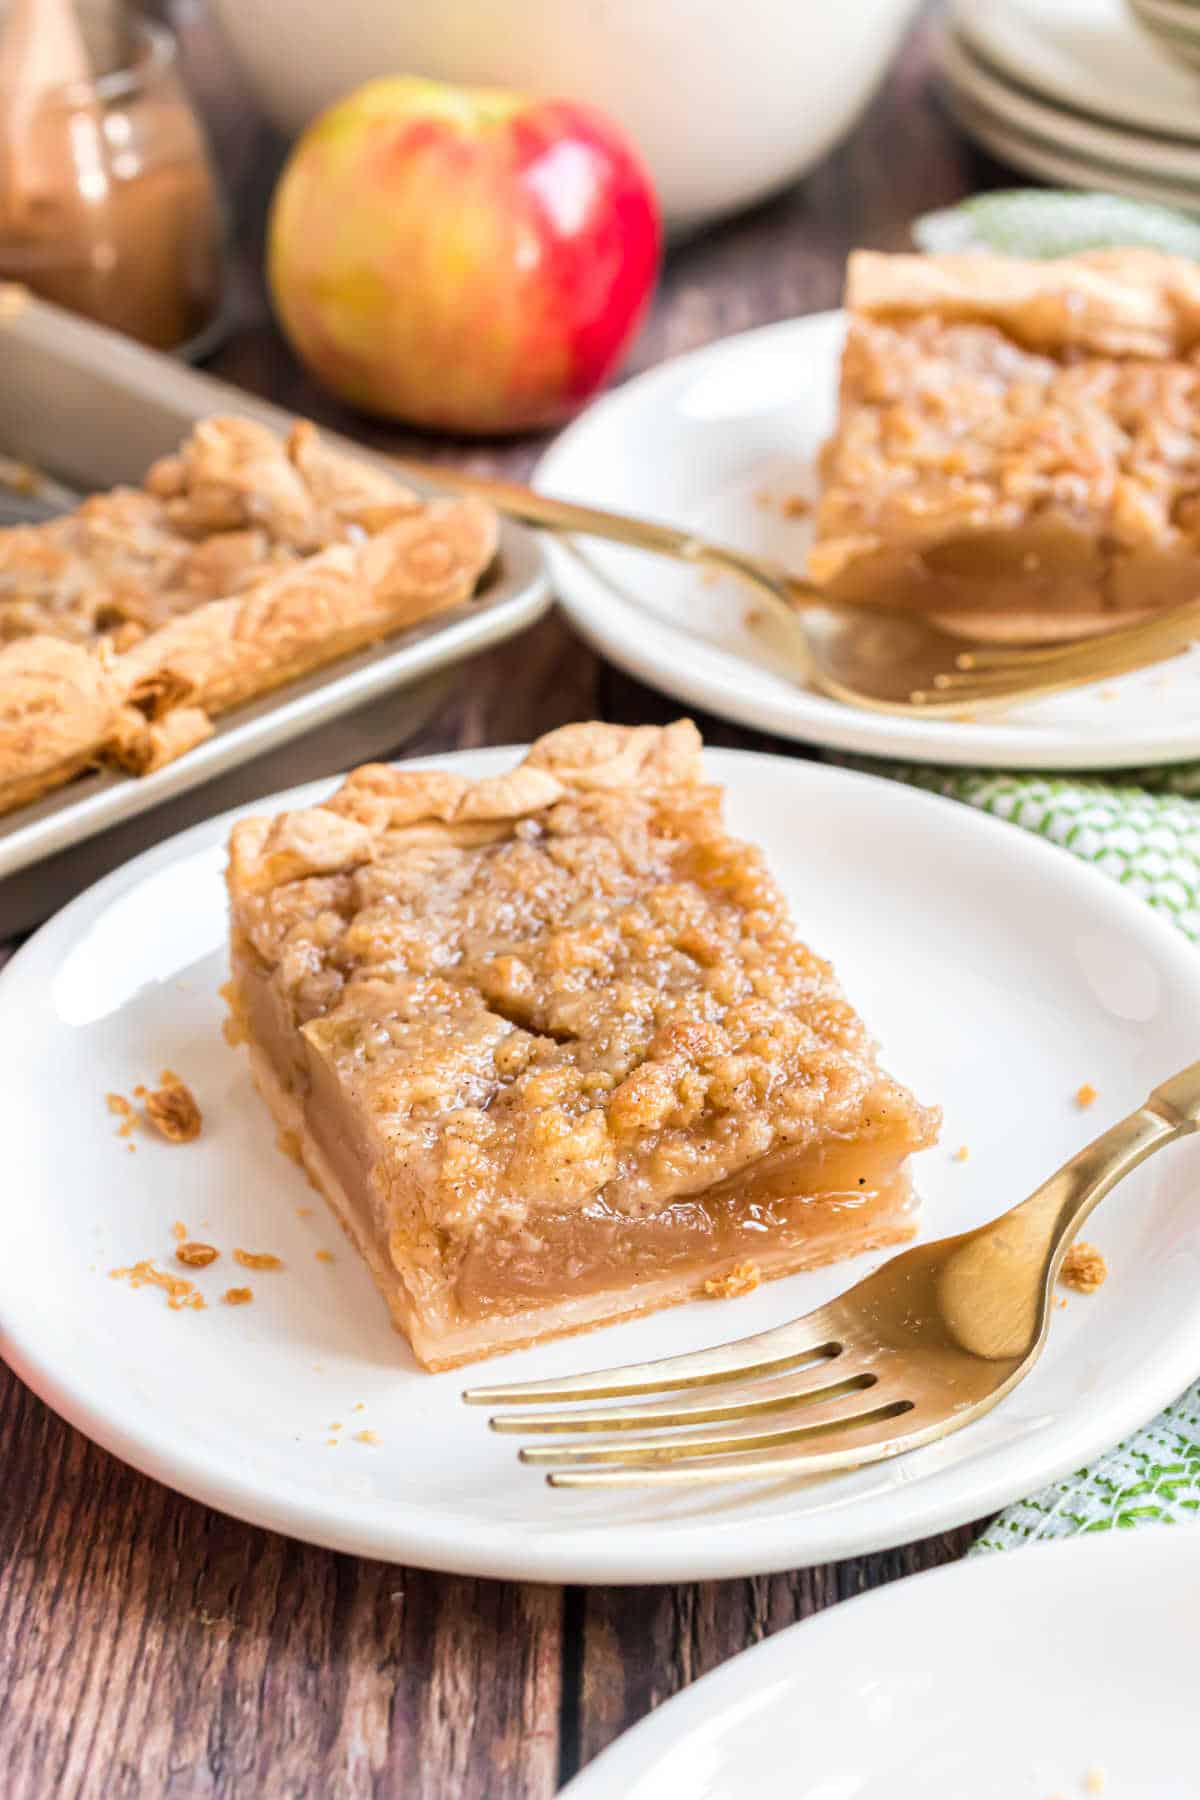 A slice of apple slab pie on a plate with a fork.